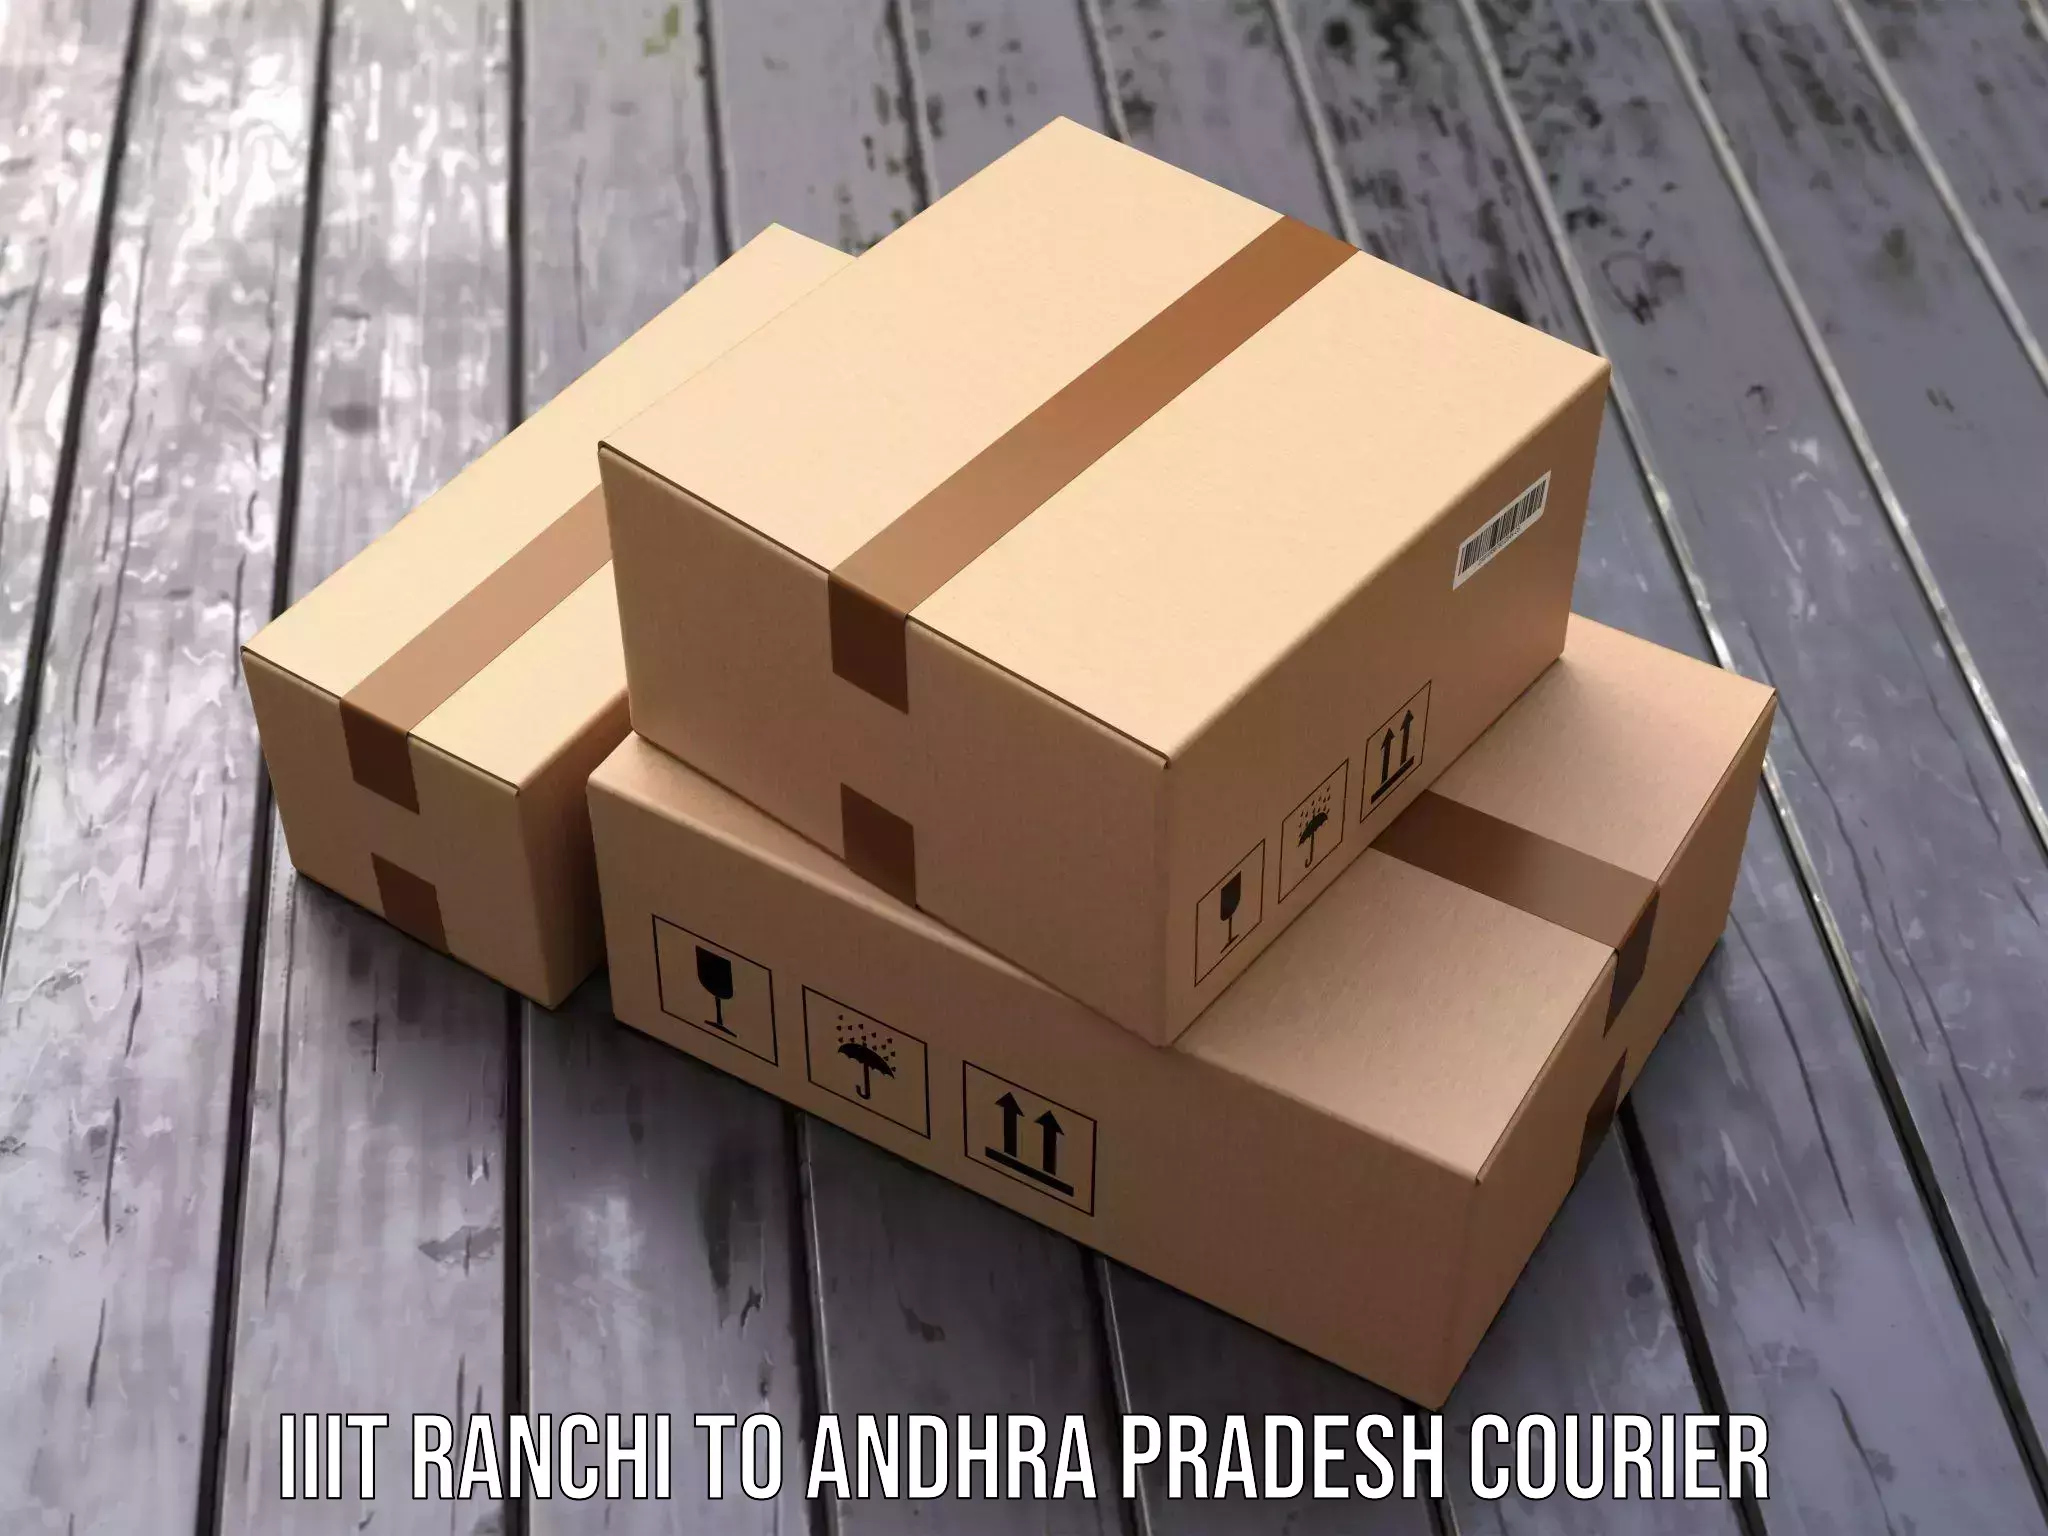 Next day courier IIIT Ranchi to Tirupati